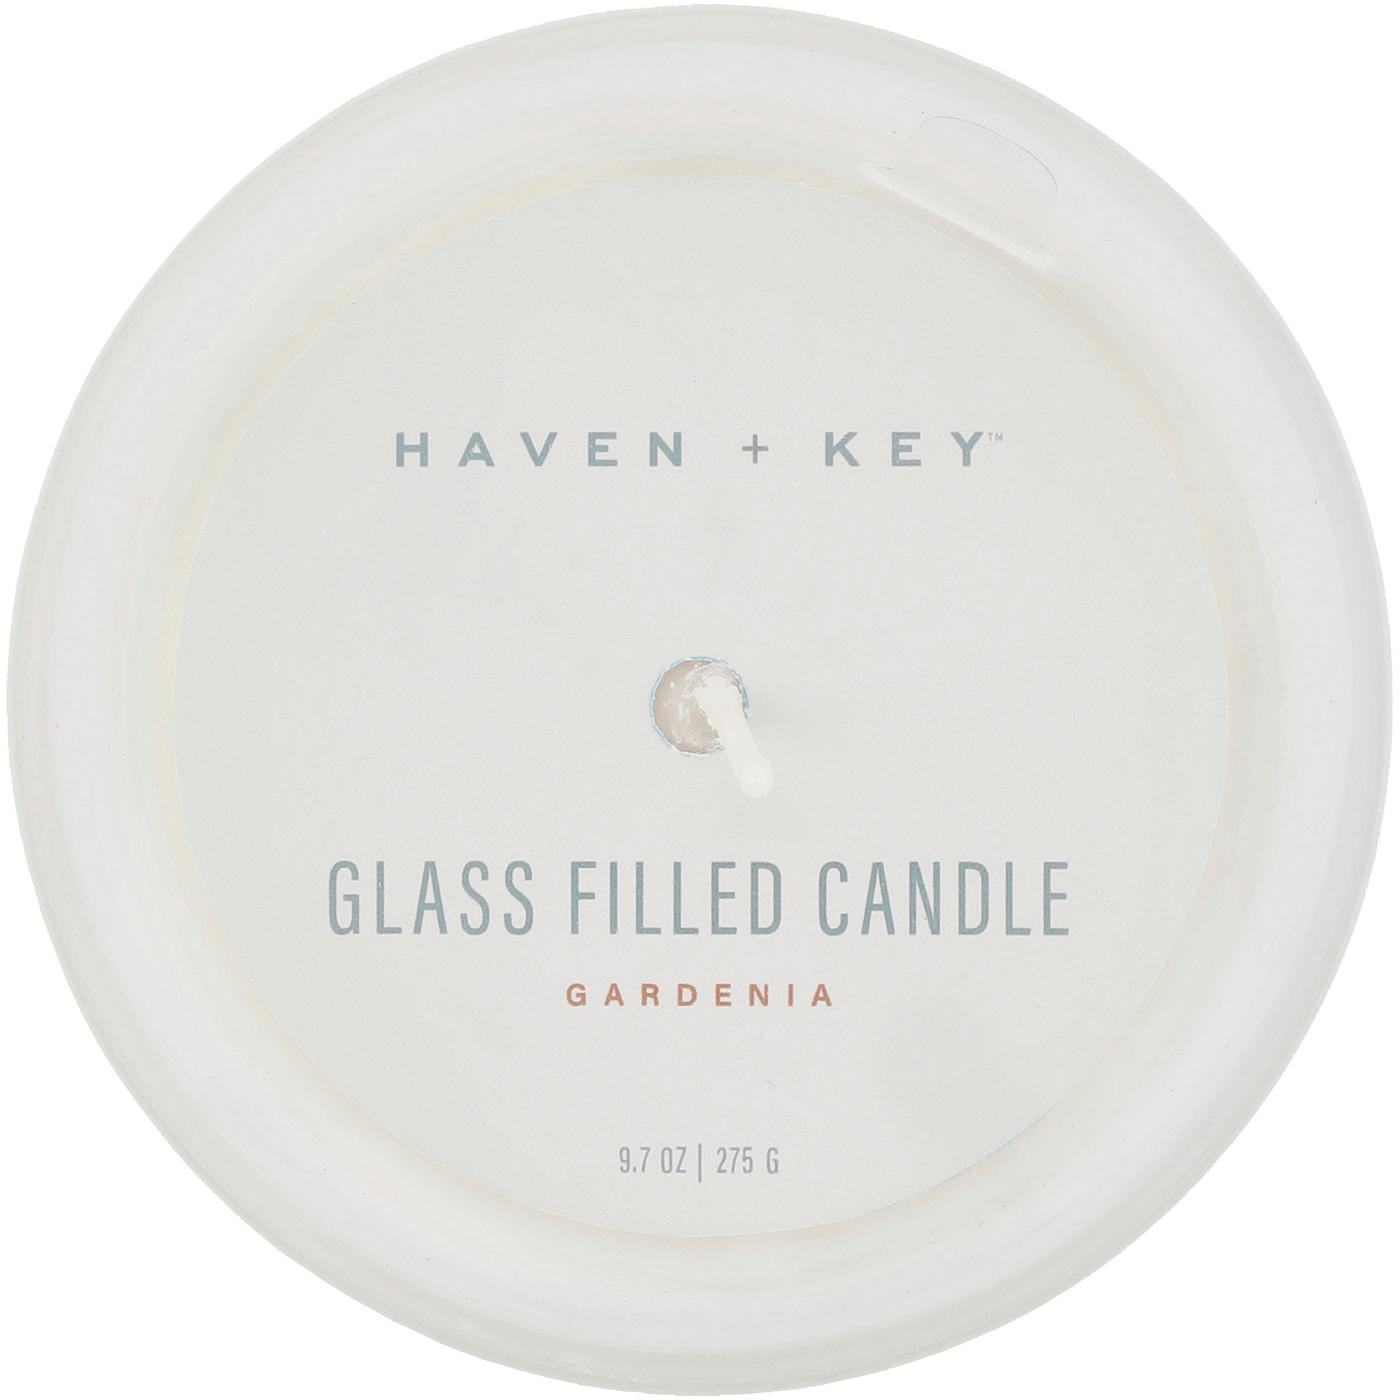 Haven + Key Gardenia Scented Candle; image 2 of 2